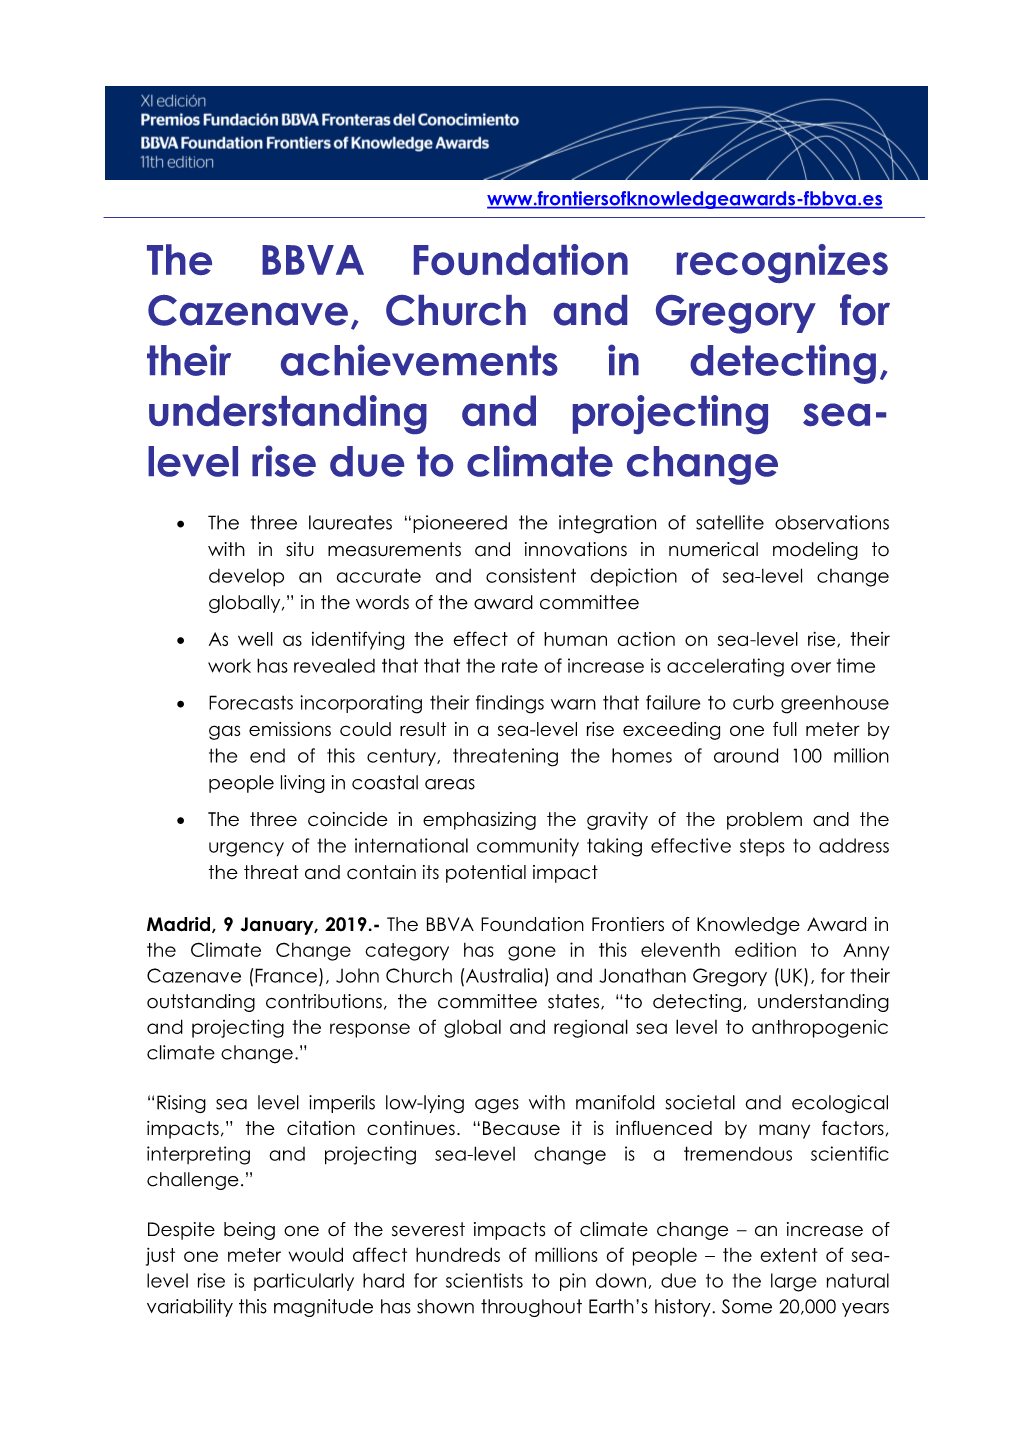 The BBVA Foundation Recognizes Cazenave, Church and Gregory for Their Achievements in Detecting, Understanding and Projecting Sea- Level Rise Due to Climate Change